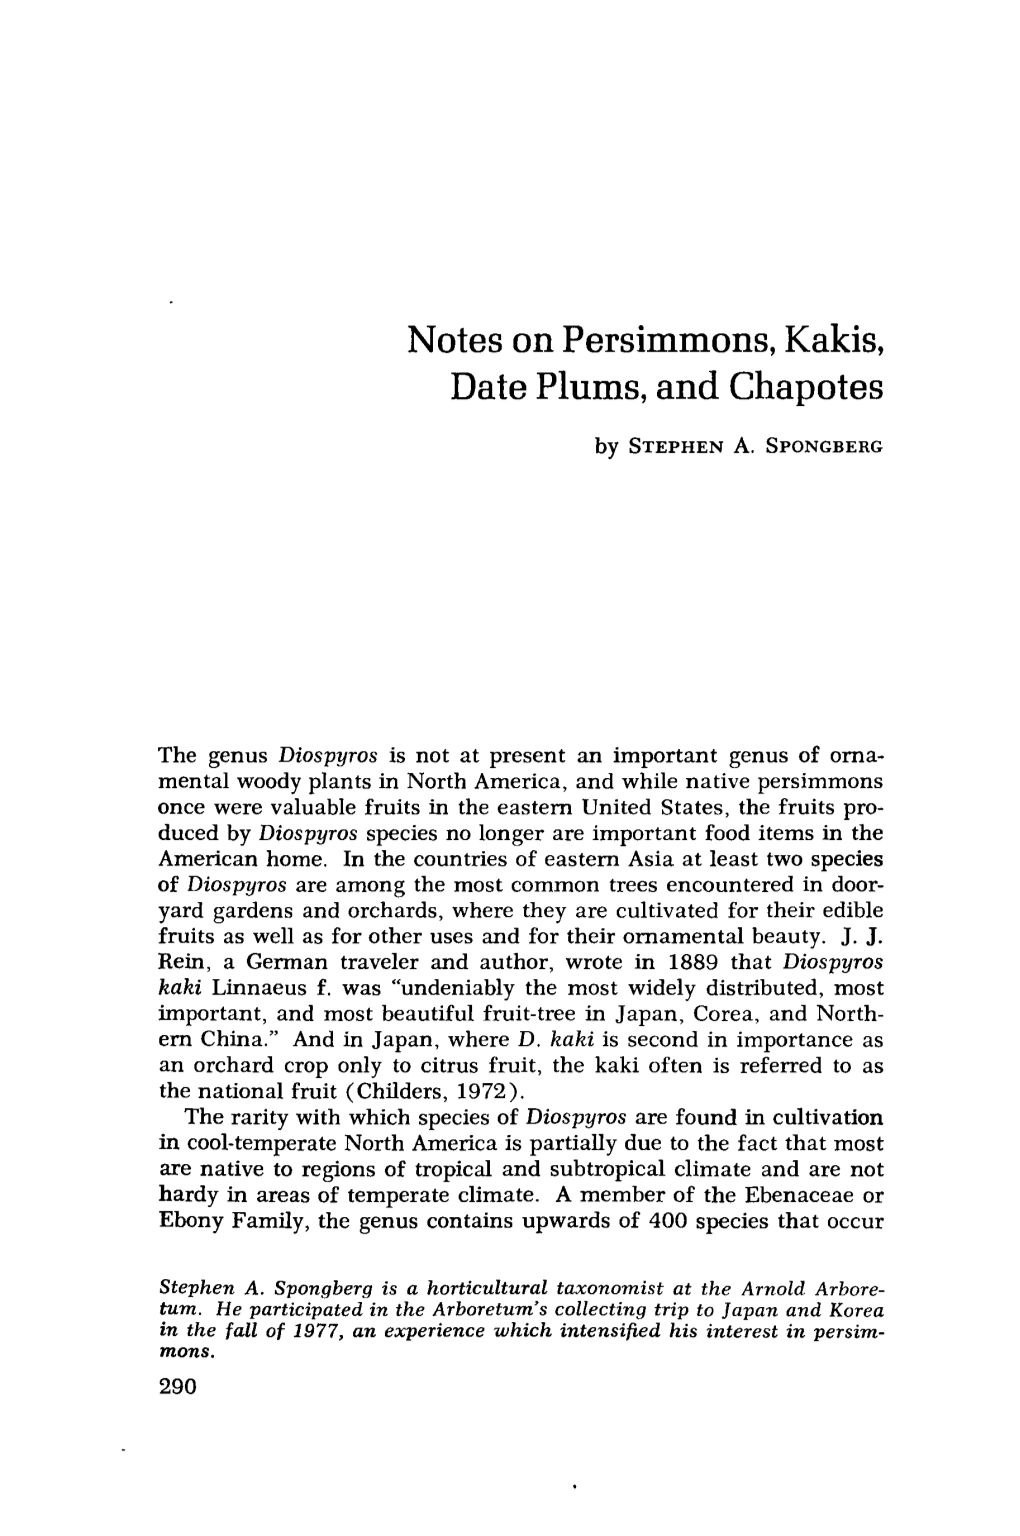 Notes on Persimmons, Kakis, Date Plums, and Chapotes by STEPHEN A